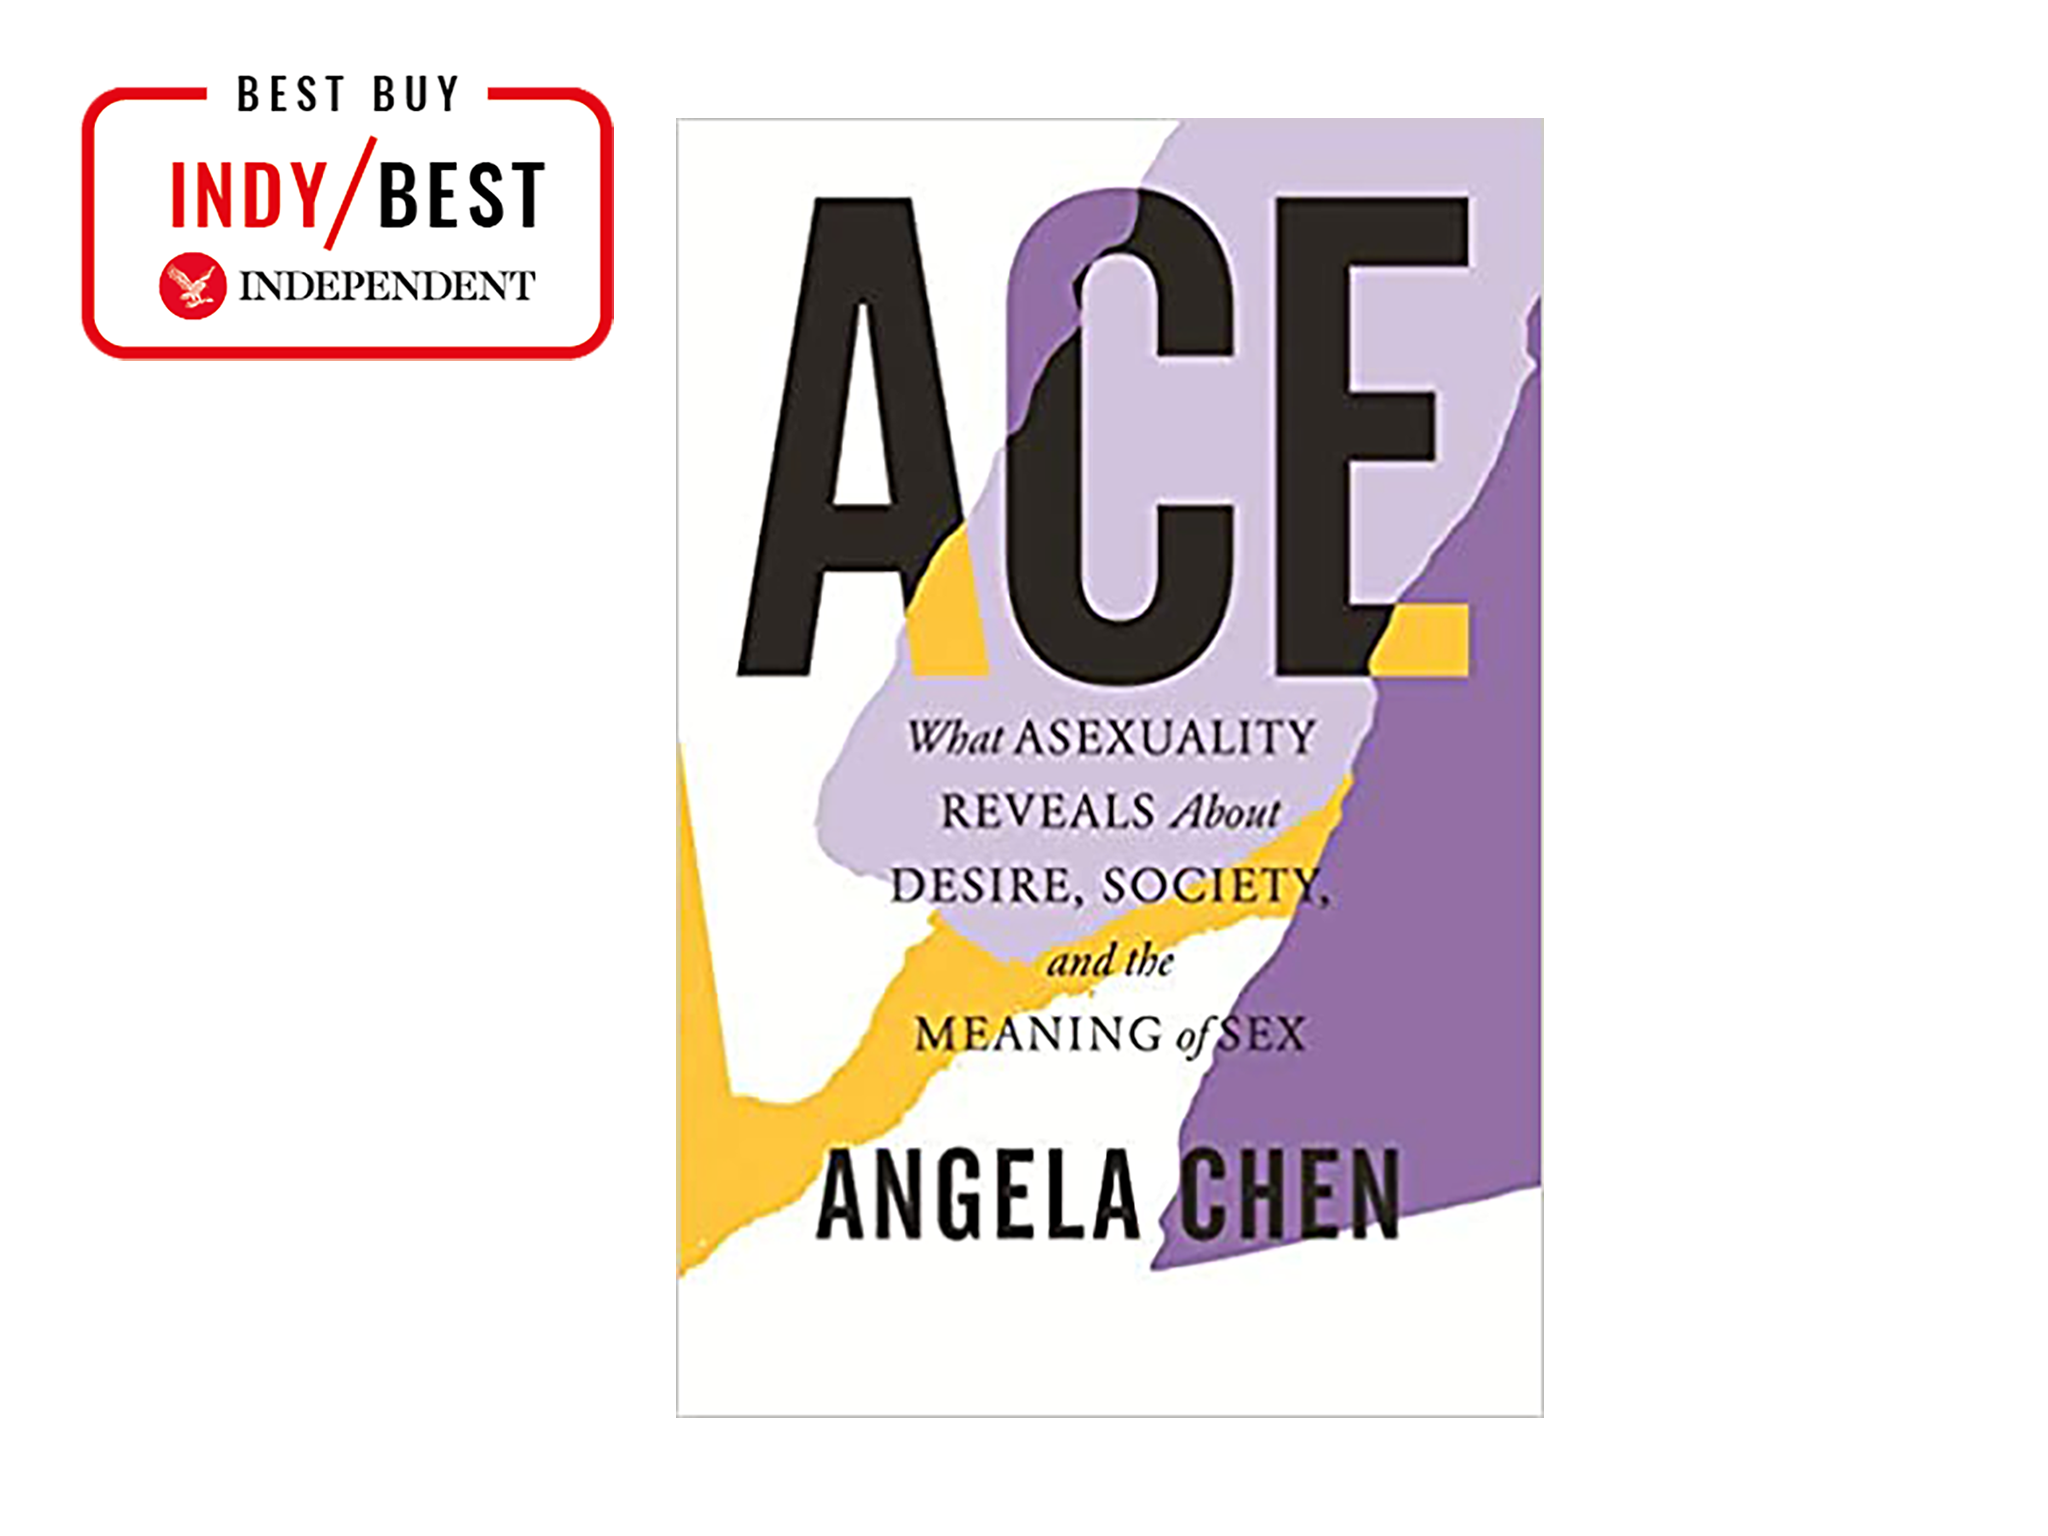 Ace What Asexuality Reveals About Desire, Society, and the Meaning of Sex by Angela Chen.png